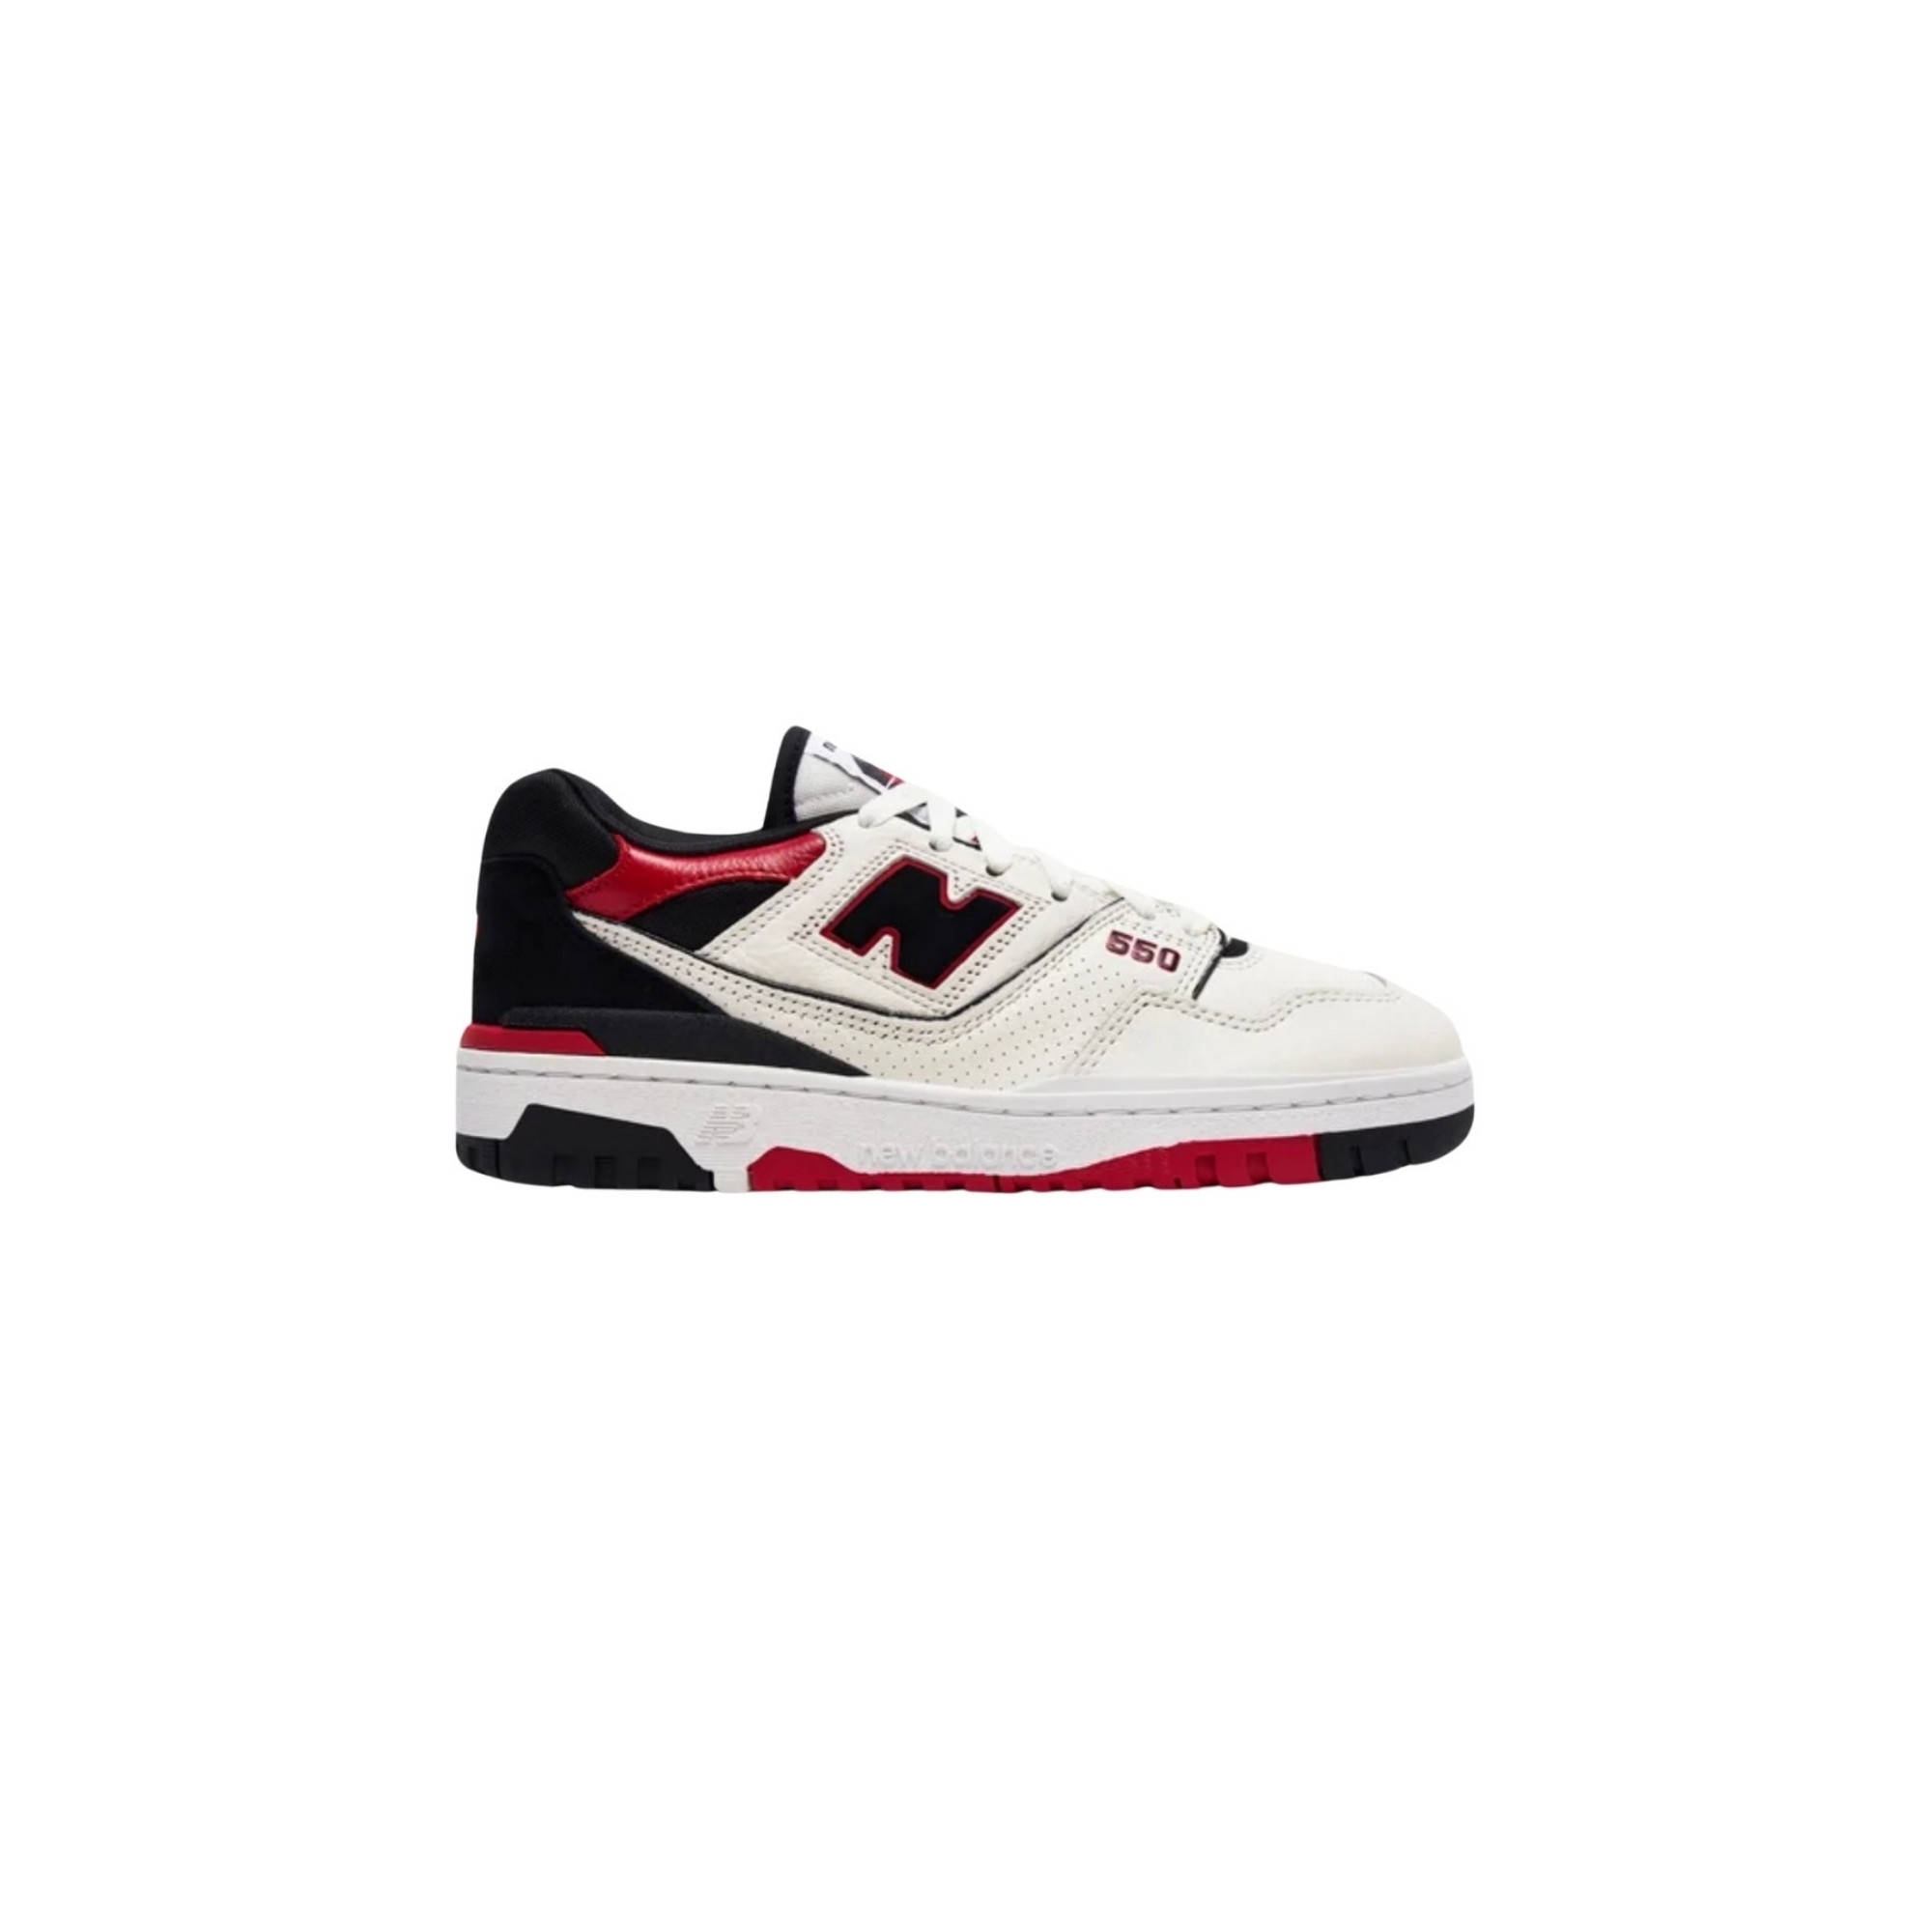 LAETHER-SUEDE    WHT-BLK-RED